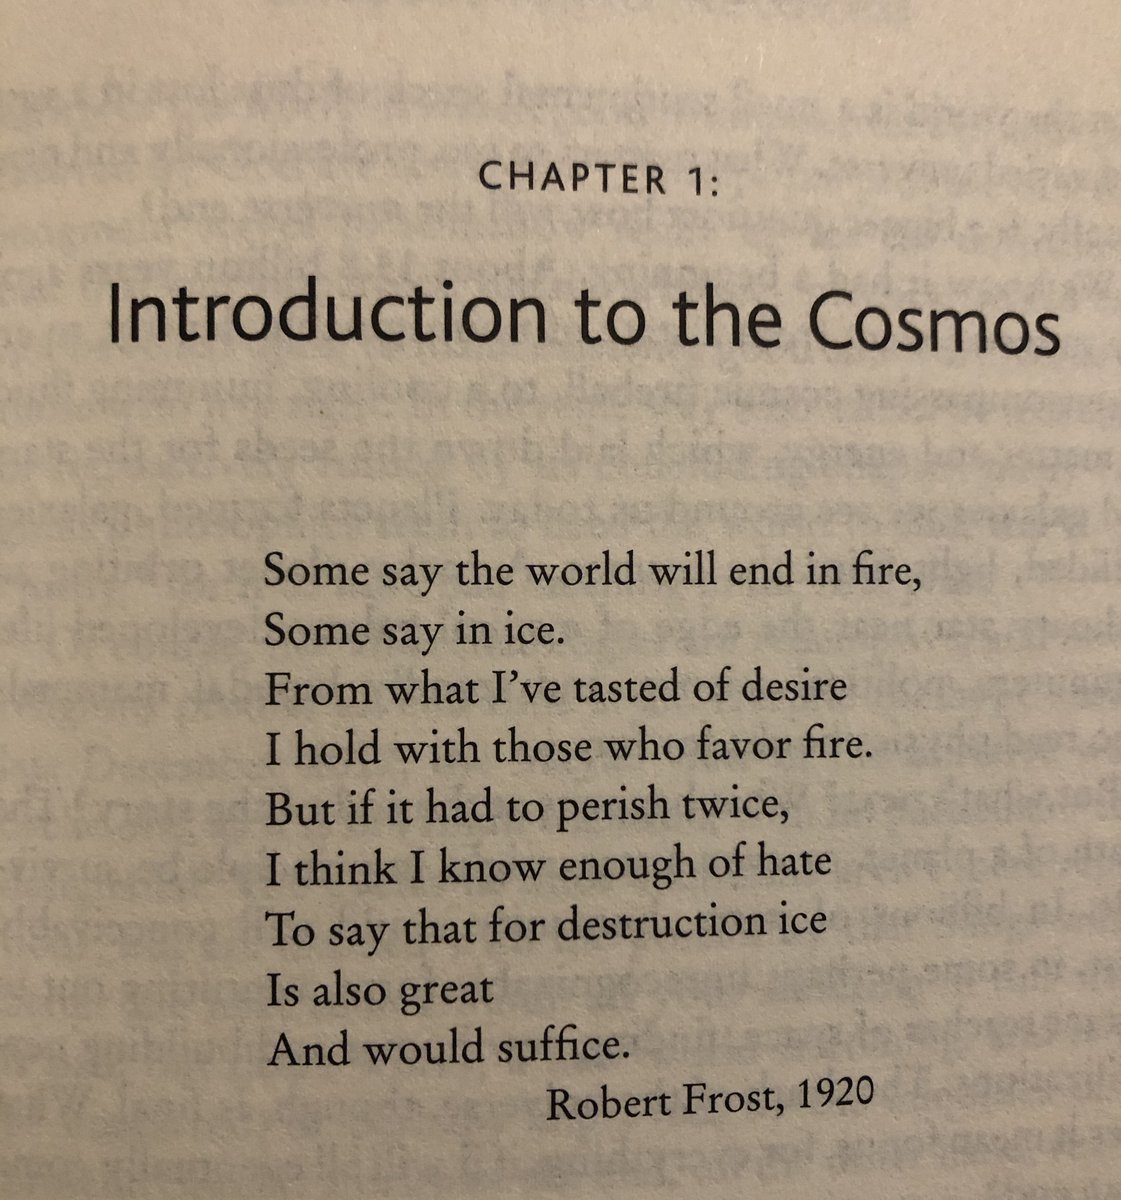 Chapter 1: Introduction to the Cosmos. Robert Frost, Fire and Ice.